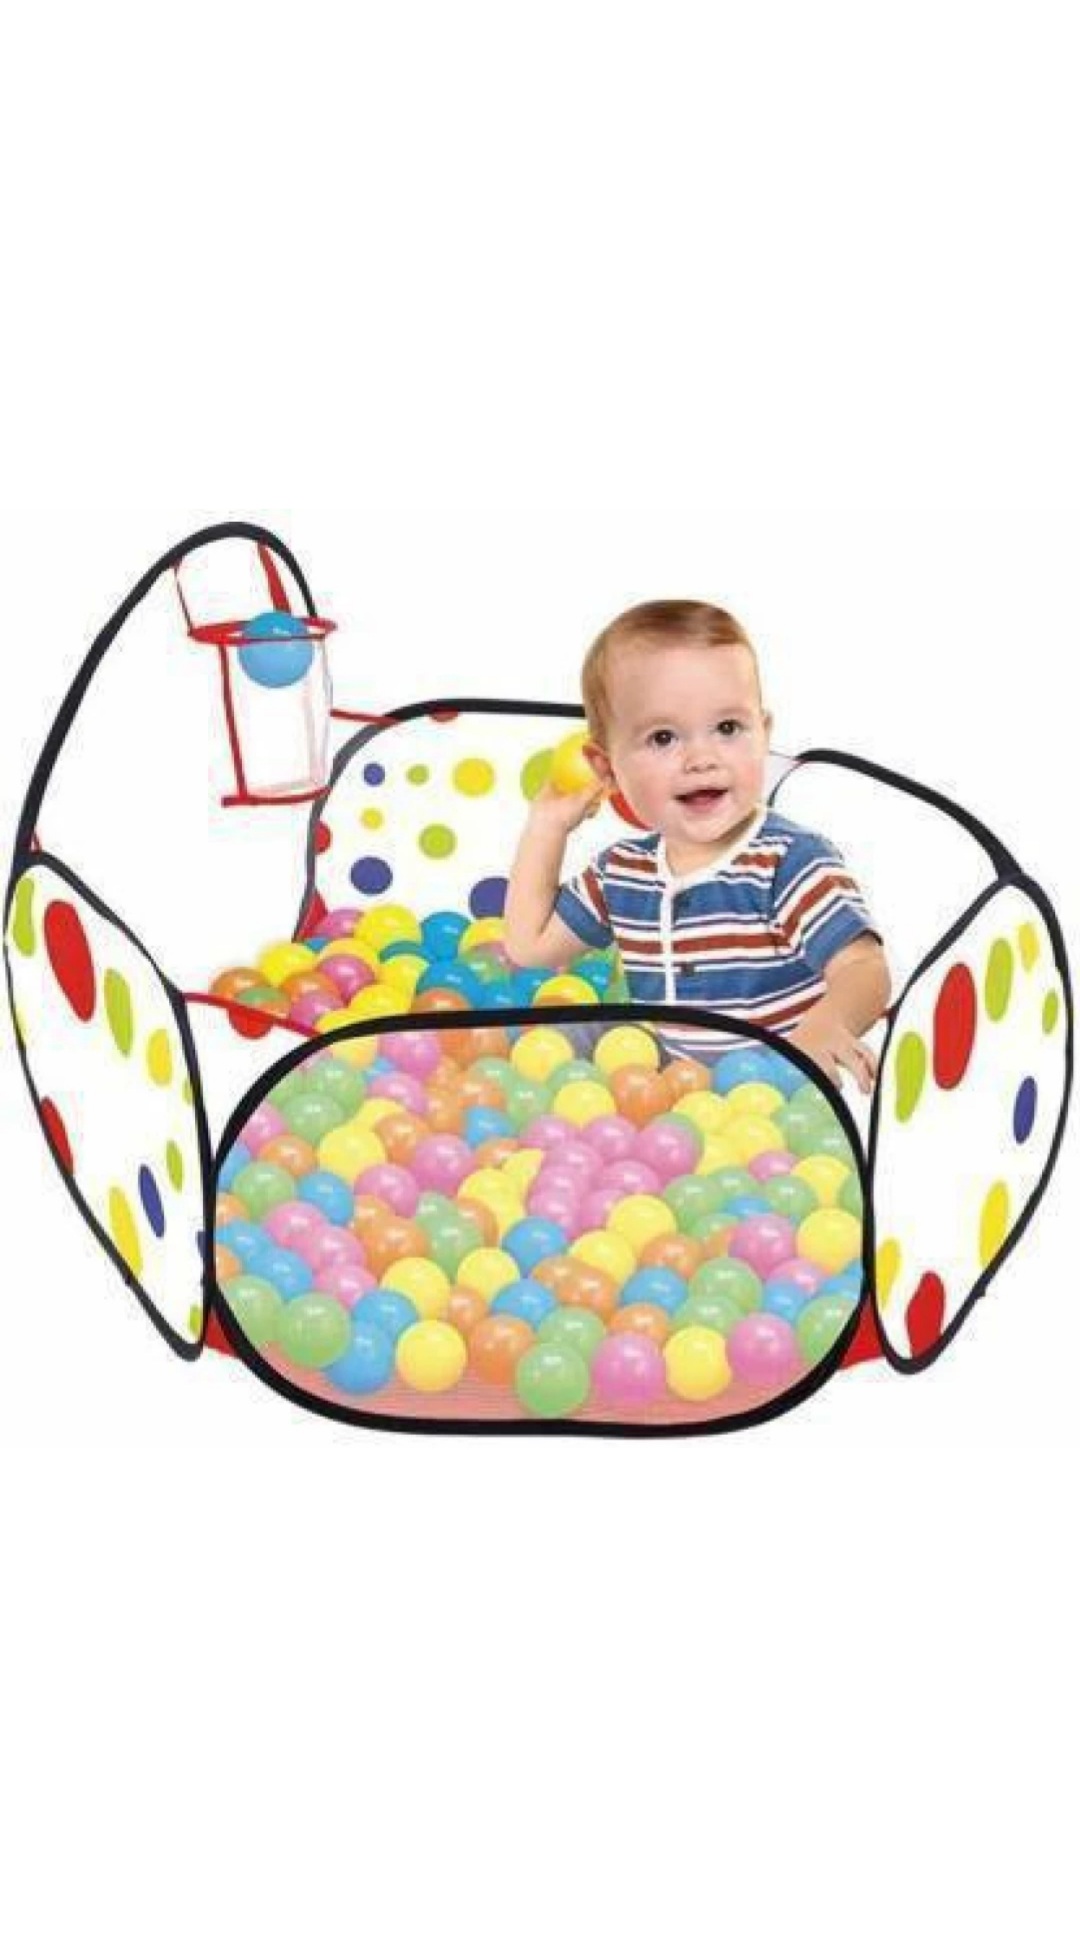 Basketball pool includes 35 balls and easily foldable toy for children